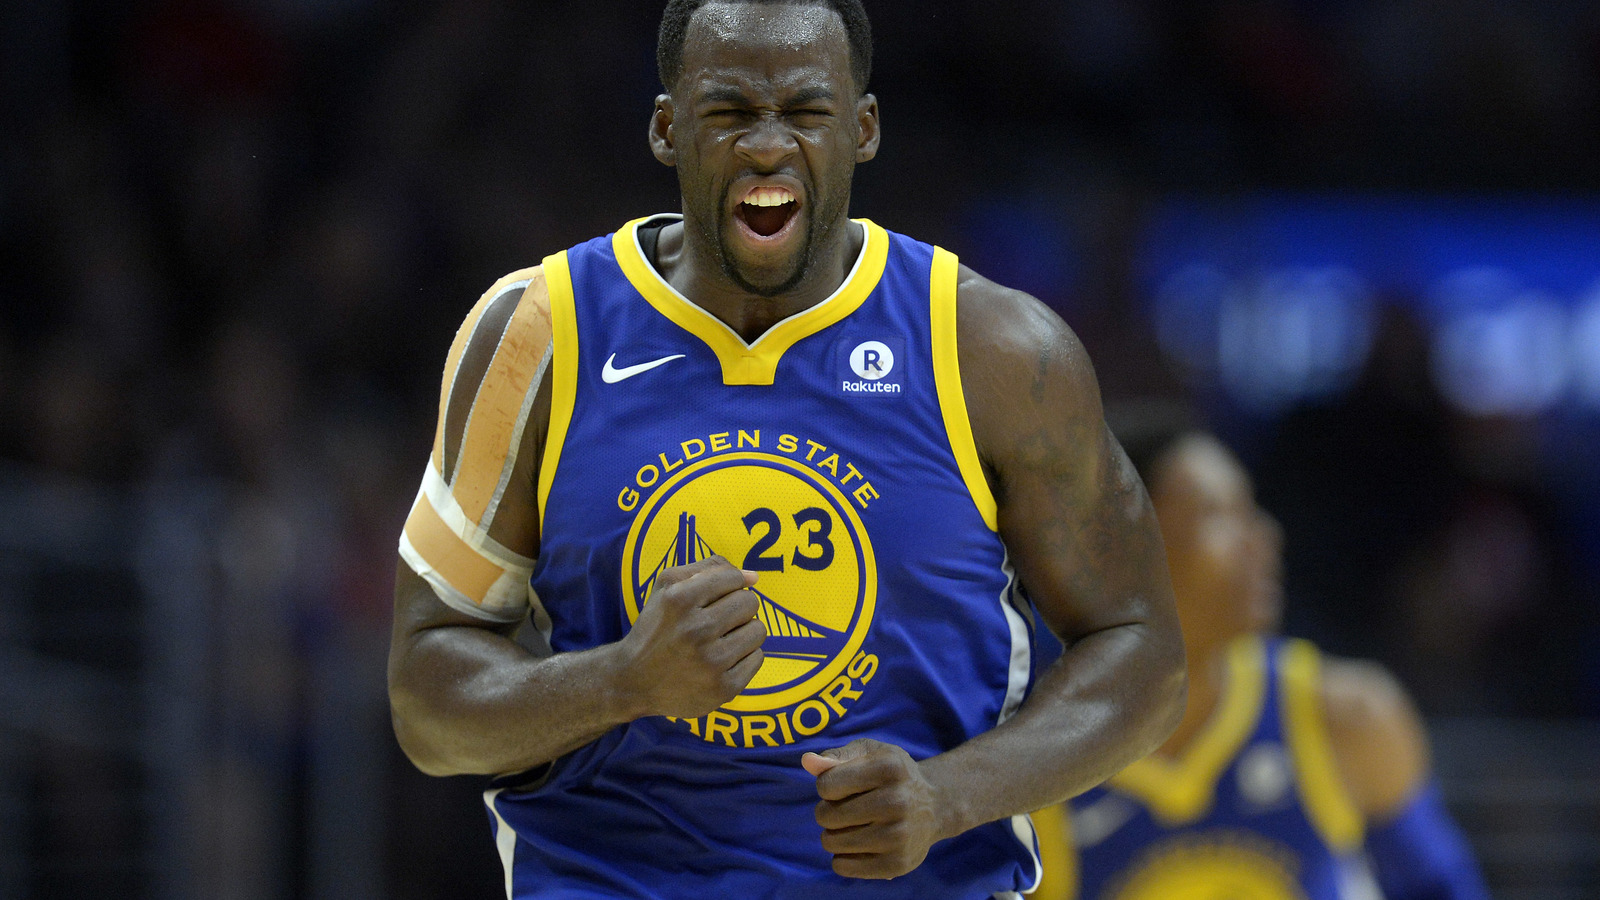 Wallpapers Sports - Leisures > Wallpapers Draymond Green Wallpaper N°456122  by wallfoot - Hebus.com